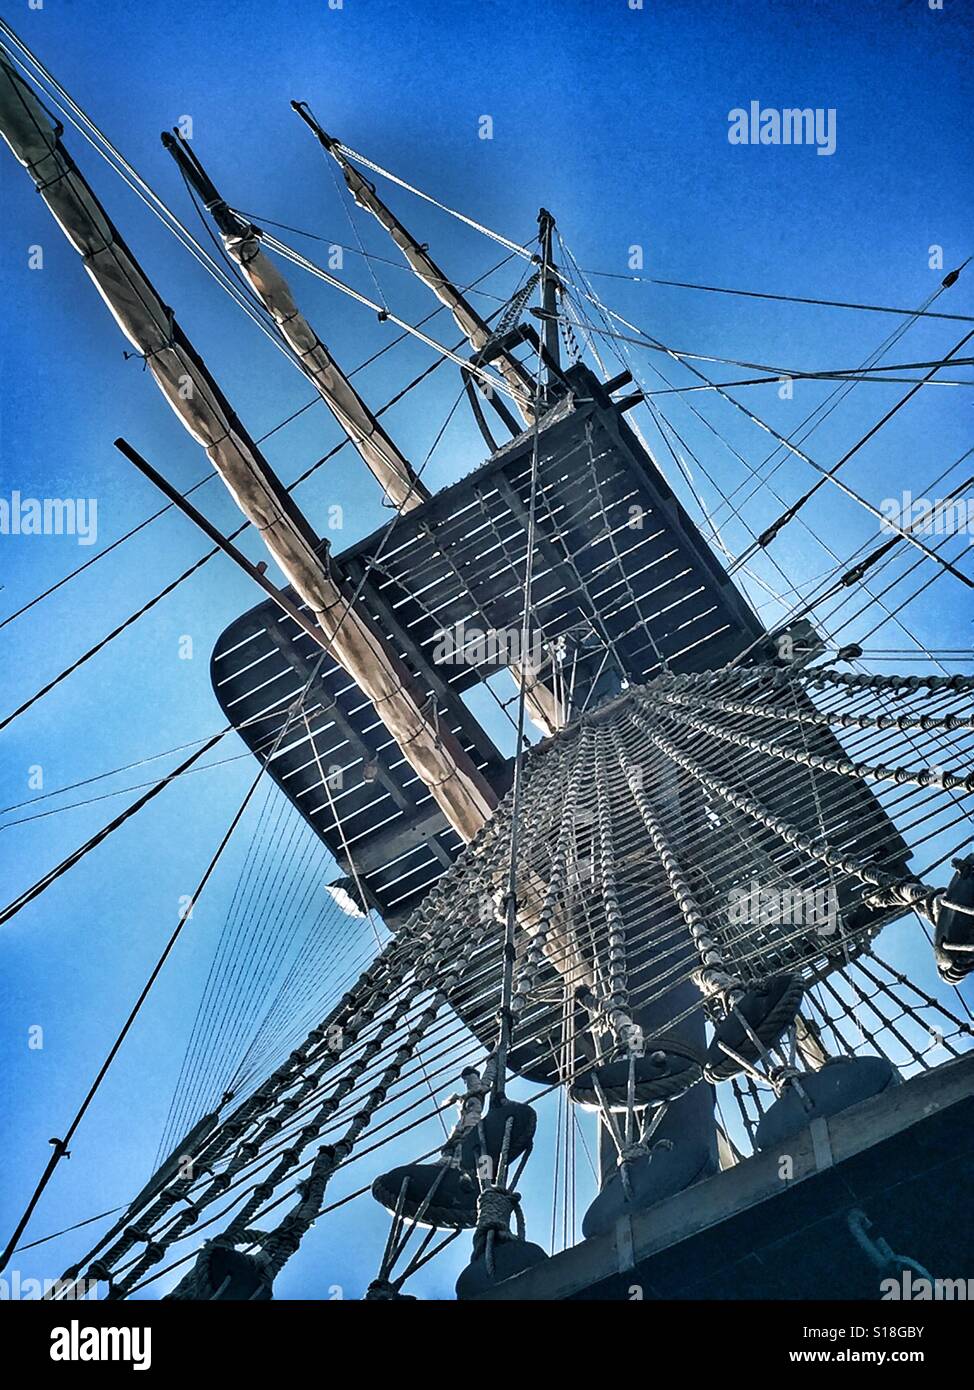 Looking up at a replica of an 18th century Galleon. The Santisima Trinidad. In Alicante, Spain. Stock Photo